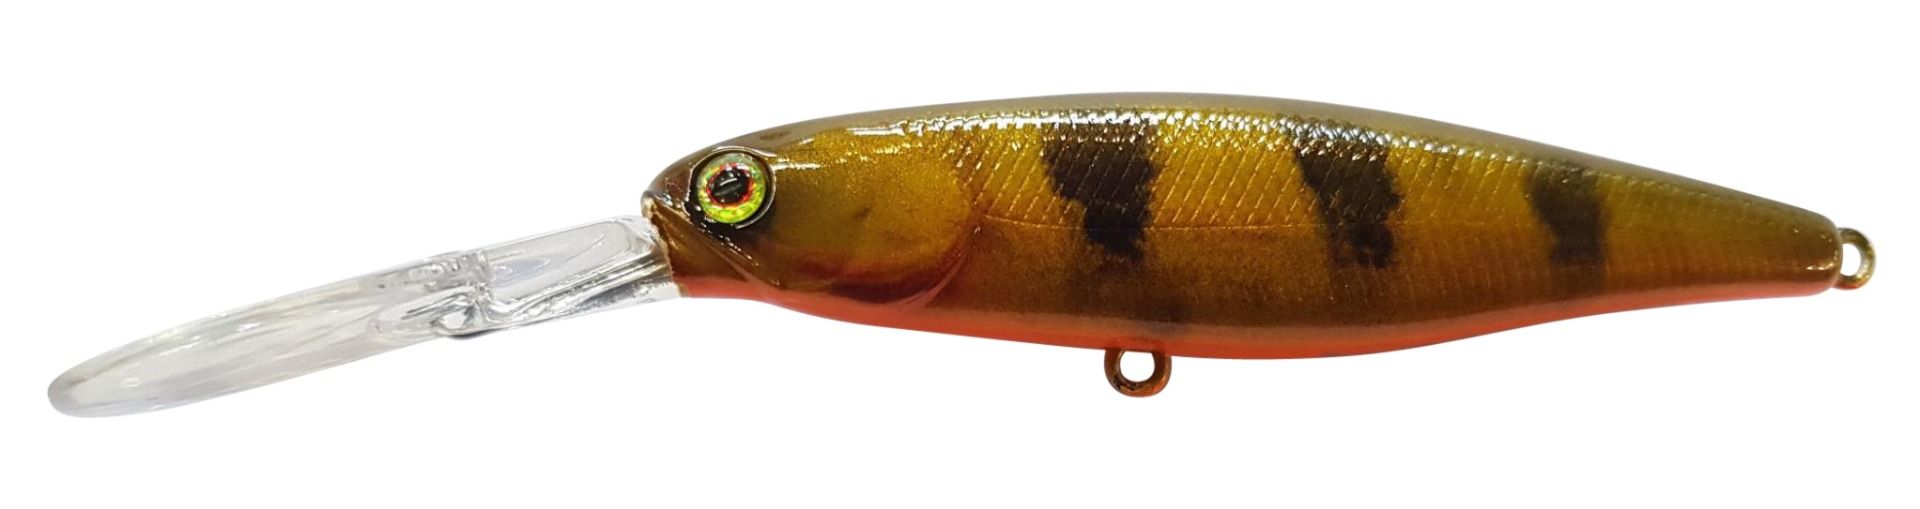 Jackall Squirrel 79mm SDD - PEACOCK - Mansfield Hunting & Fishing - Products to prepare for Corona Virus